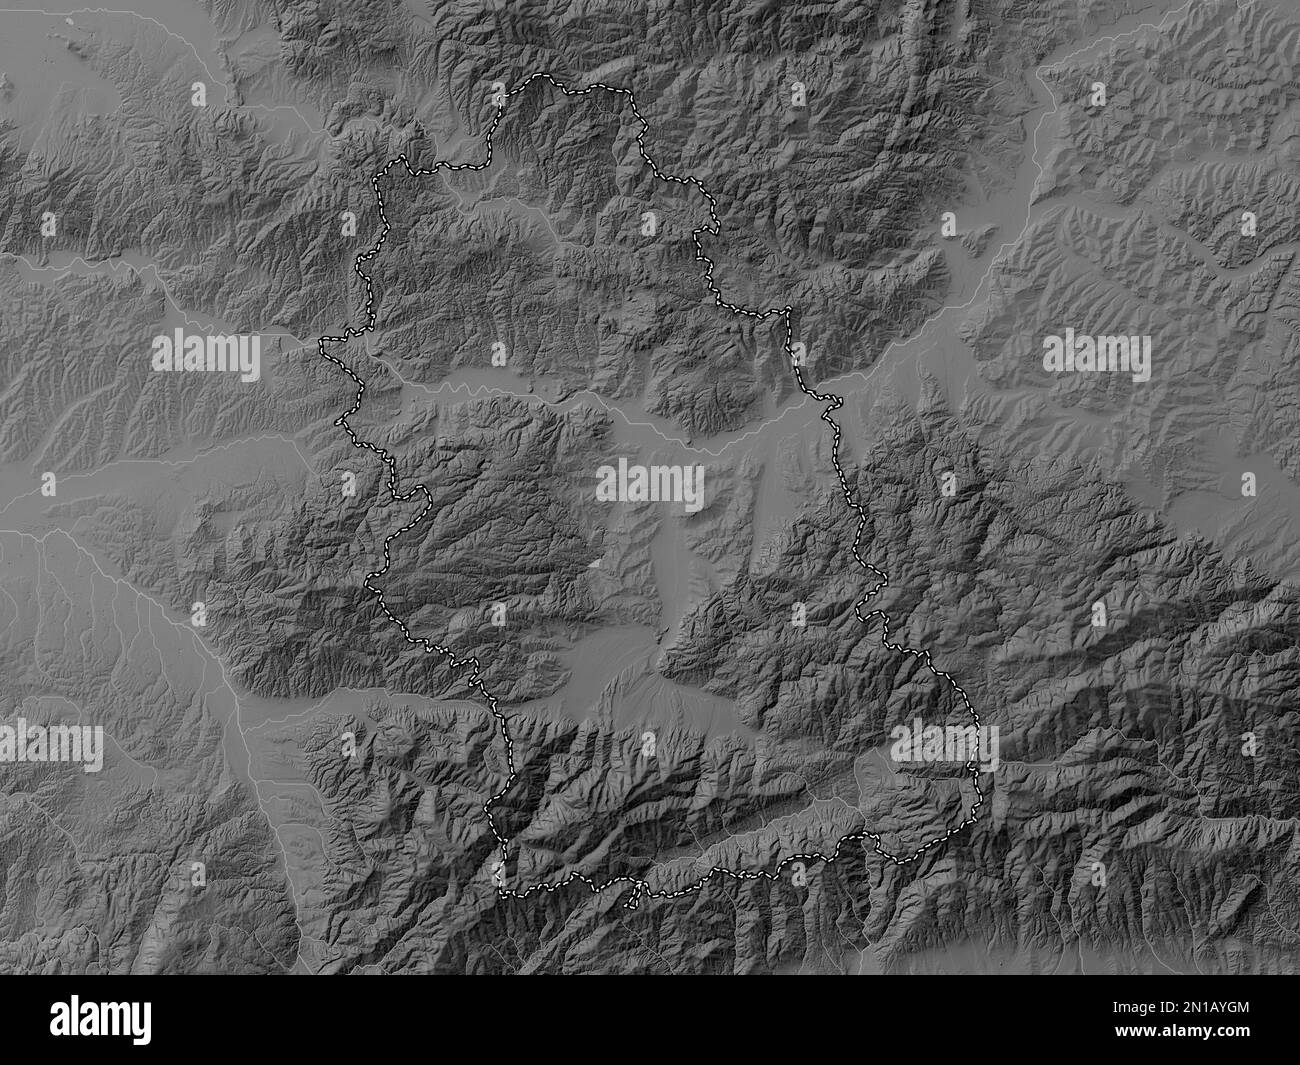 Hunedoara, county of Romania. Grayscale elevation map with lakes and rivers Stock Photo